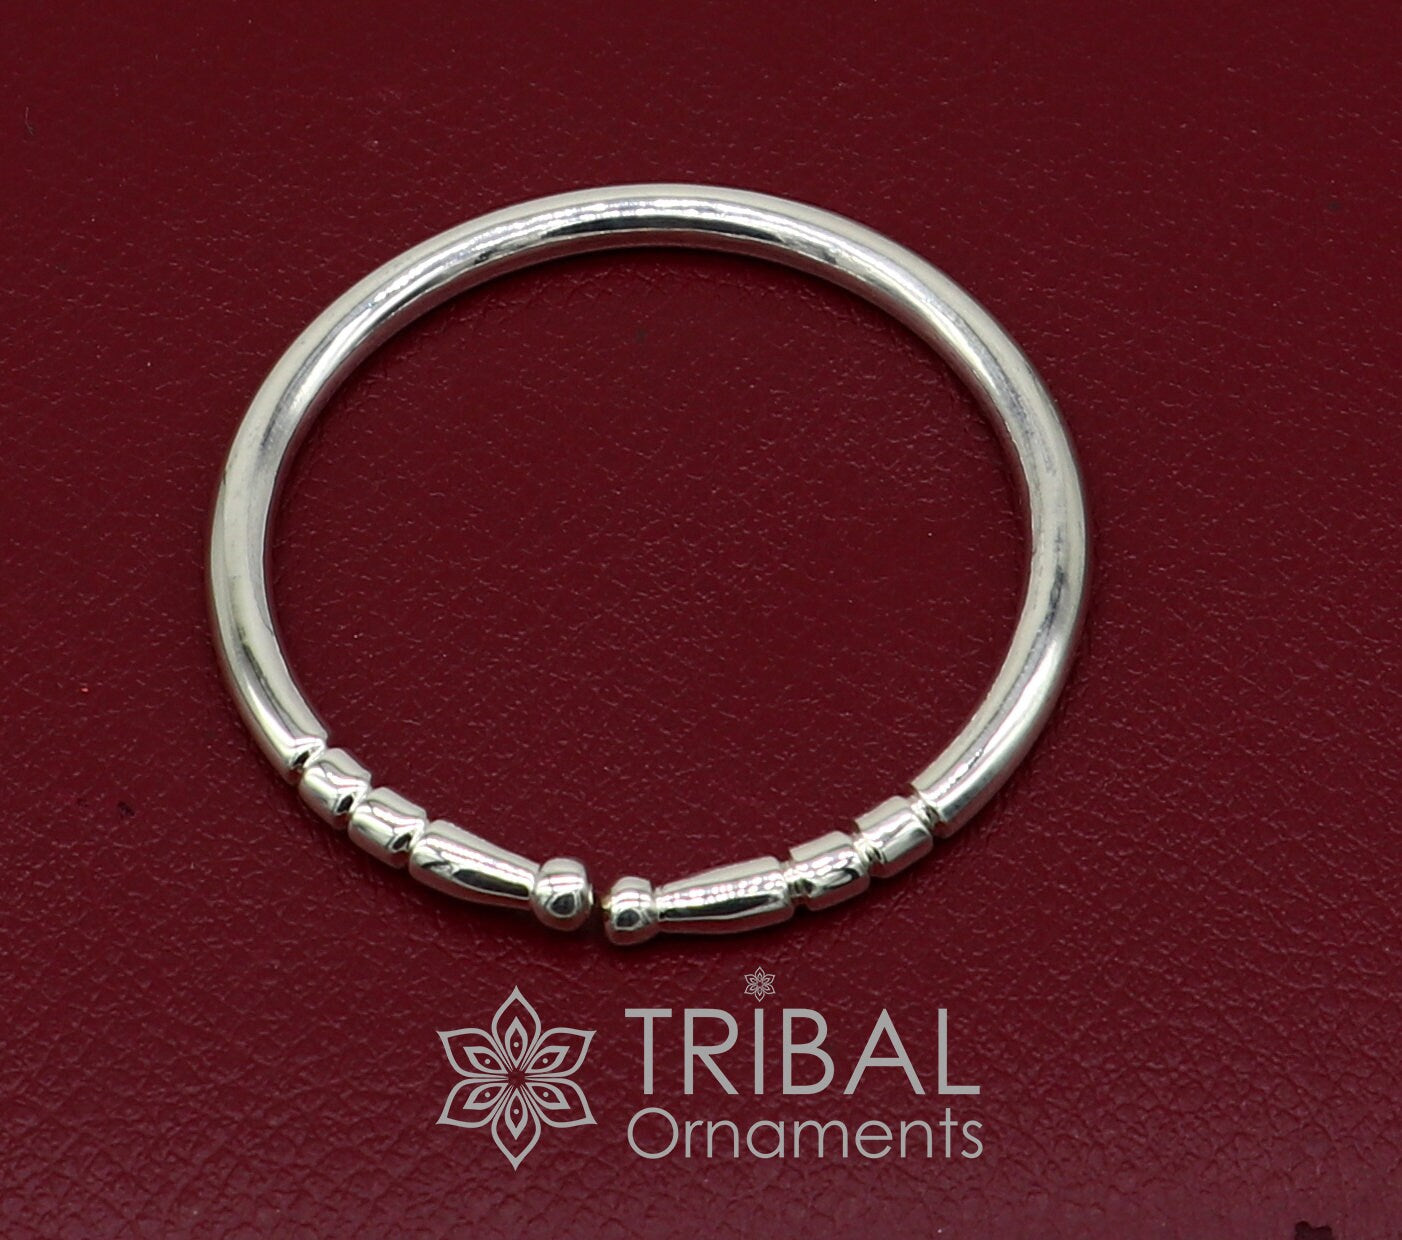 925 Solid Sterling silver handmade vintage style bangle bracelet kada  tribal jewelry best for mens gifting silver articles nsk553  TRIBAL  ORNAMENTS